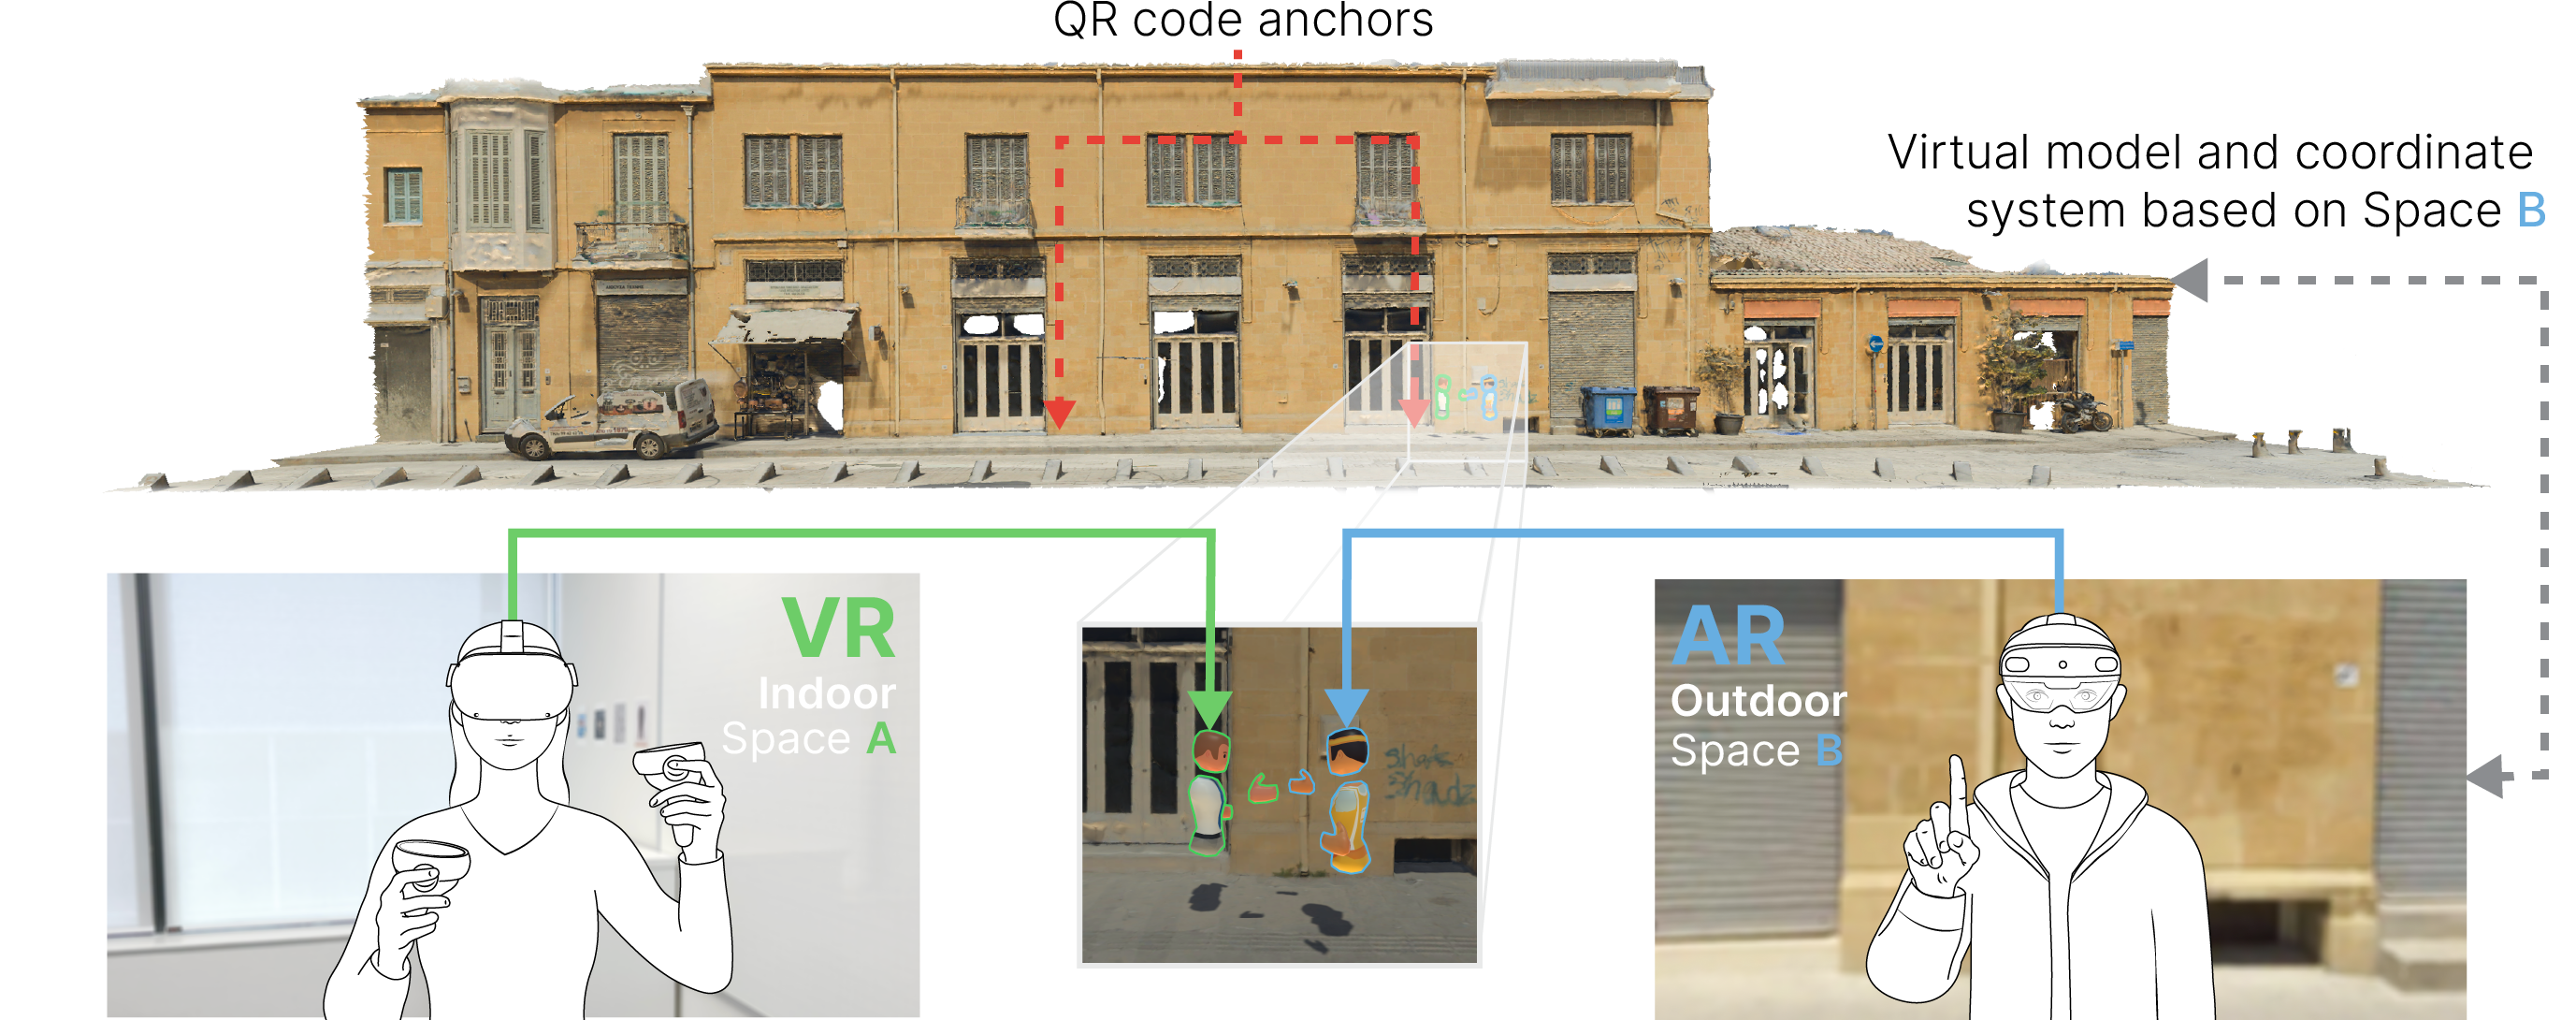 Conceptual overview of our outdoor CMR system showing a detailed 3D model of a street that a local AR user can experience in collaboration with a remote VR user. The virtual coordinate space of the shared virtual environment is aligned to the real-world surroundings of the AR user (Space B) with QR code markers. Line illustrations by Suhyun Park (artist).